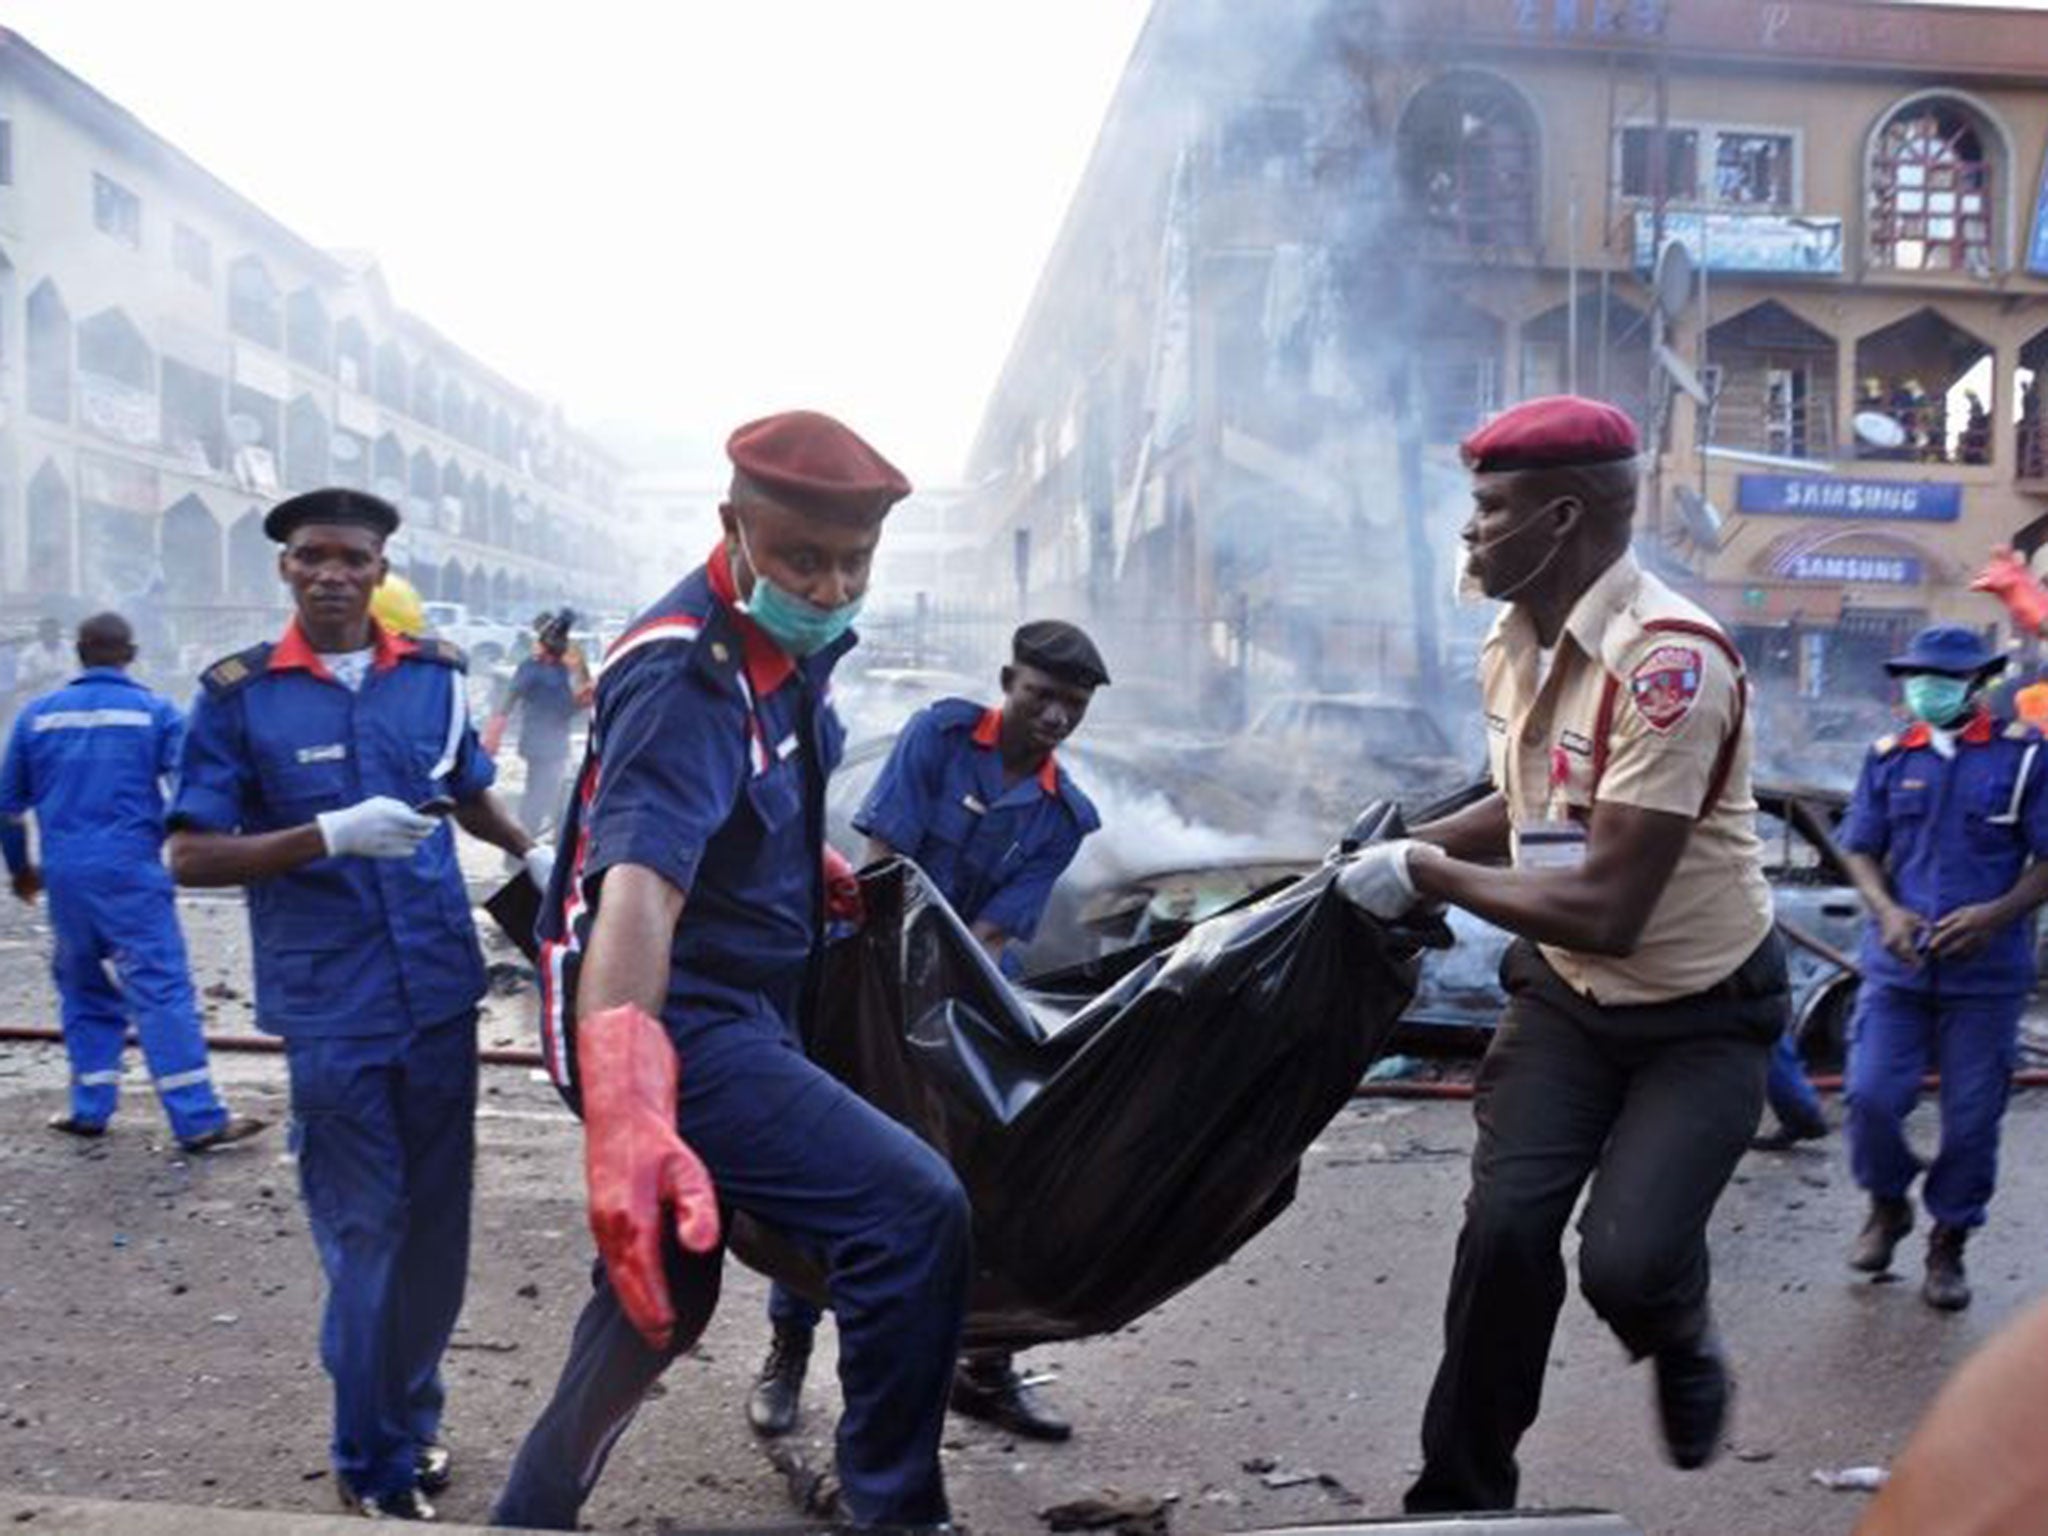 Rescue workers carry the remains of a person in a body bag, after a explosion at a shopping mall in Abuja, Nigeria, Wednesday, June 25,